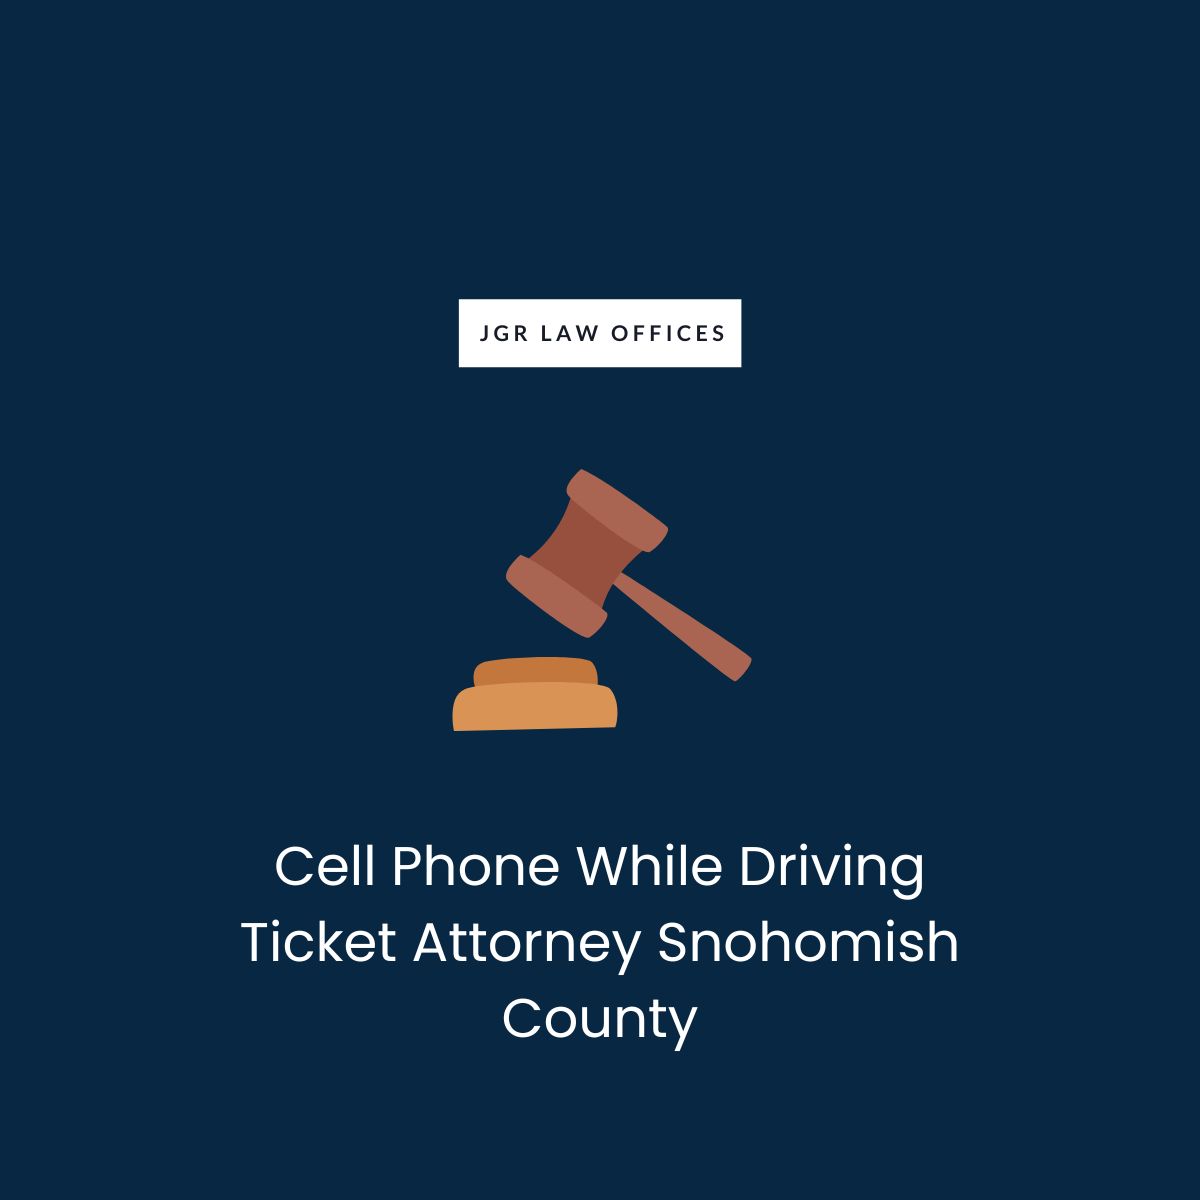 Cell Phone While Driving Ticket Attorney Snohomish County